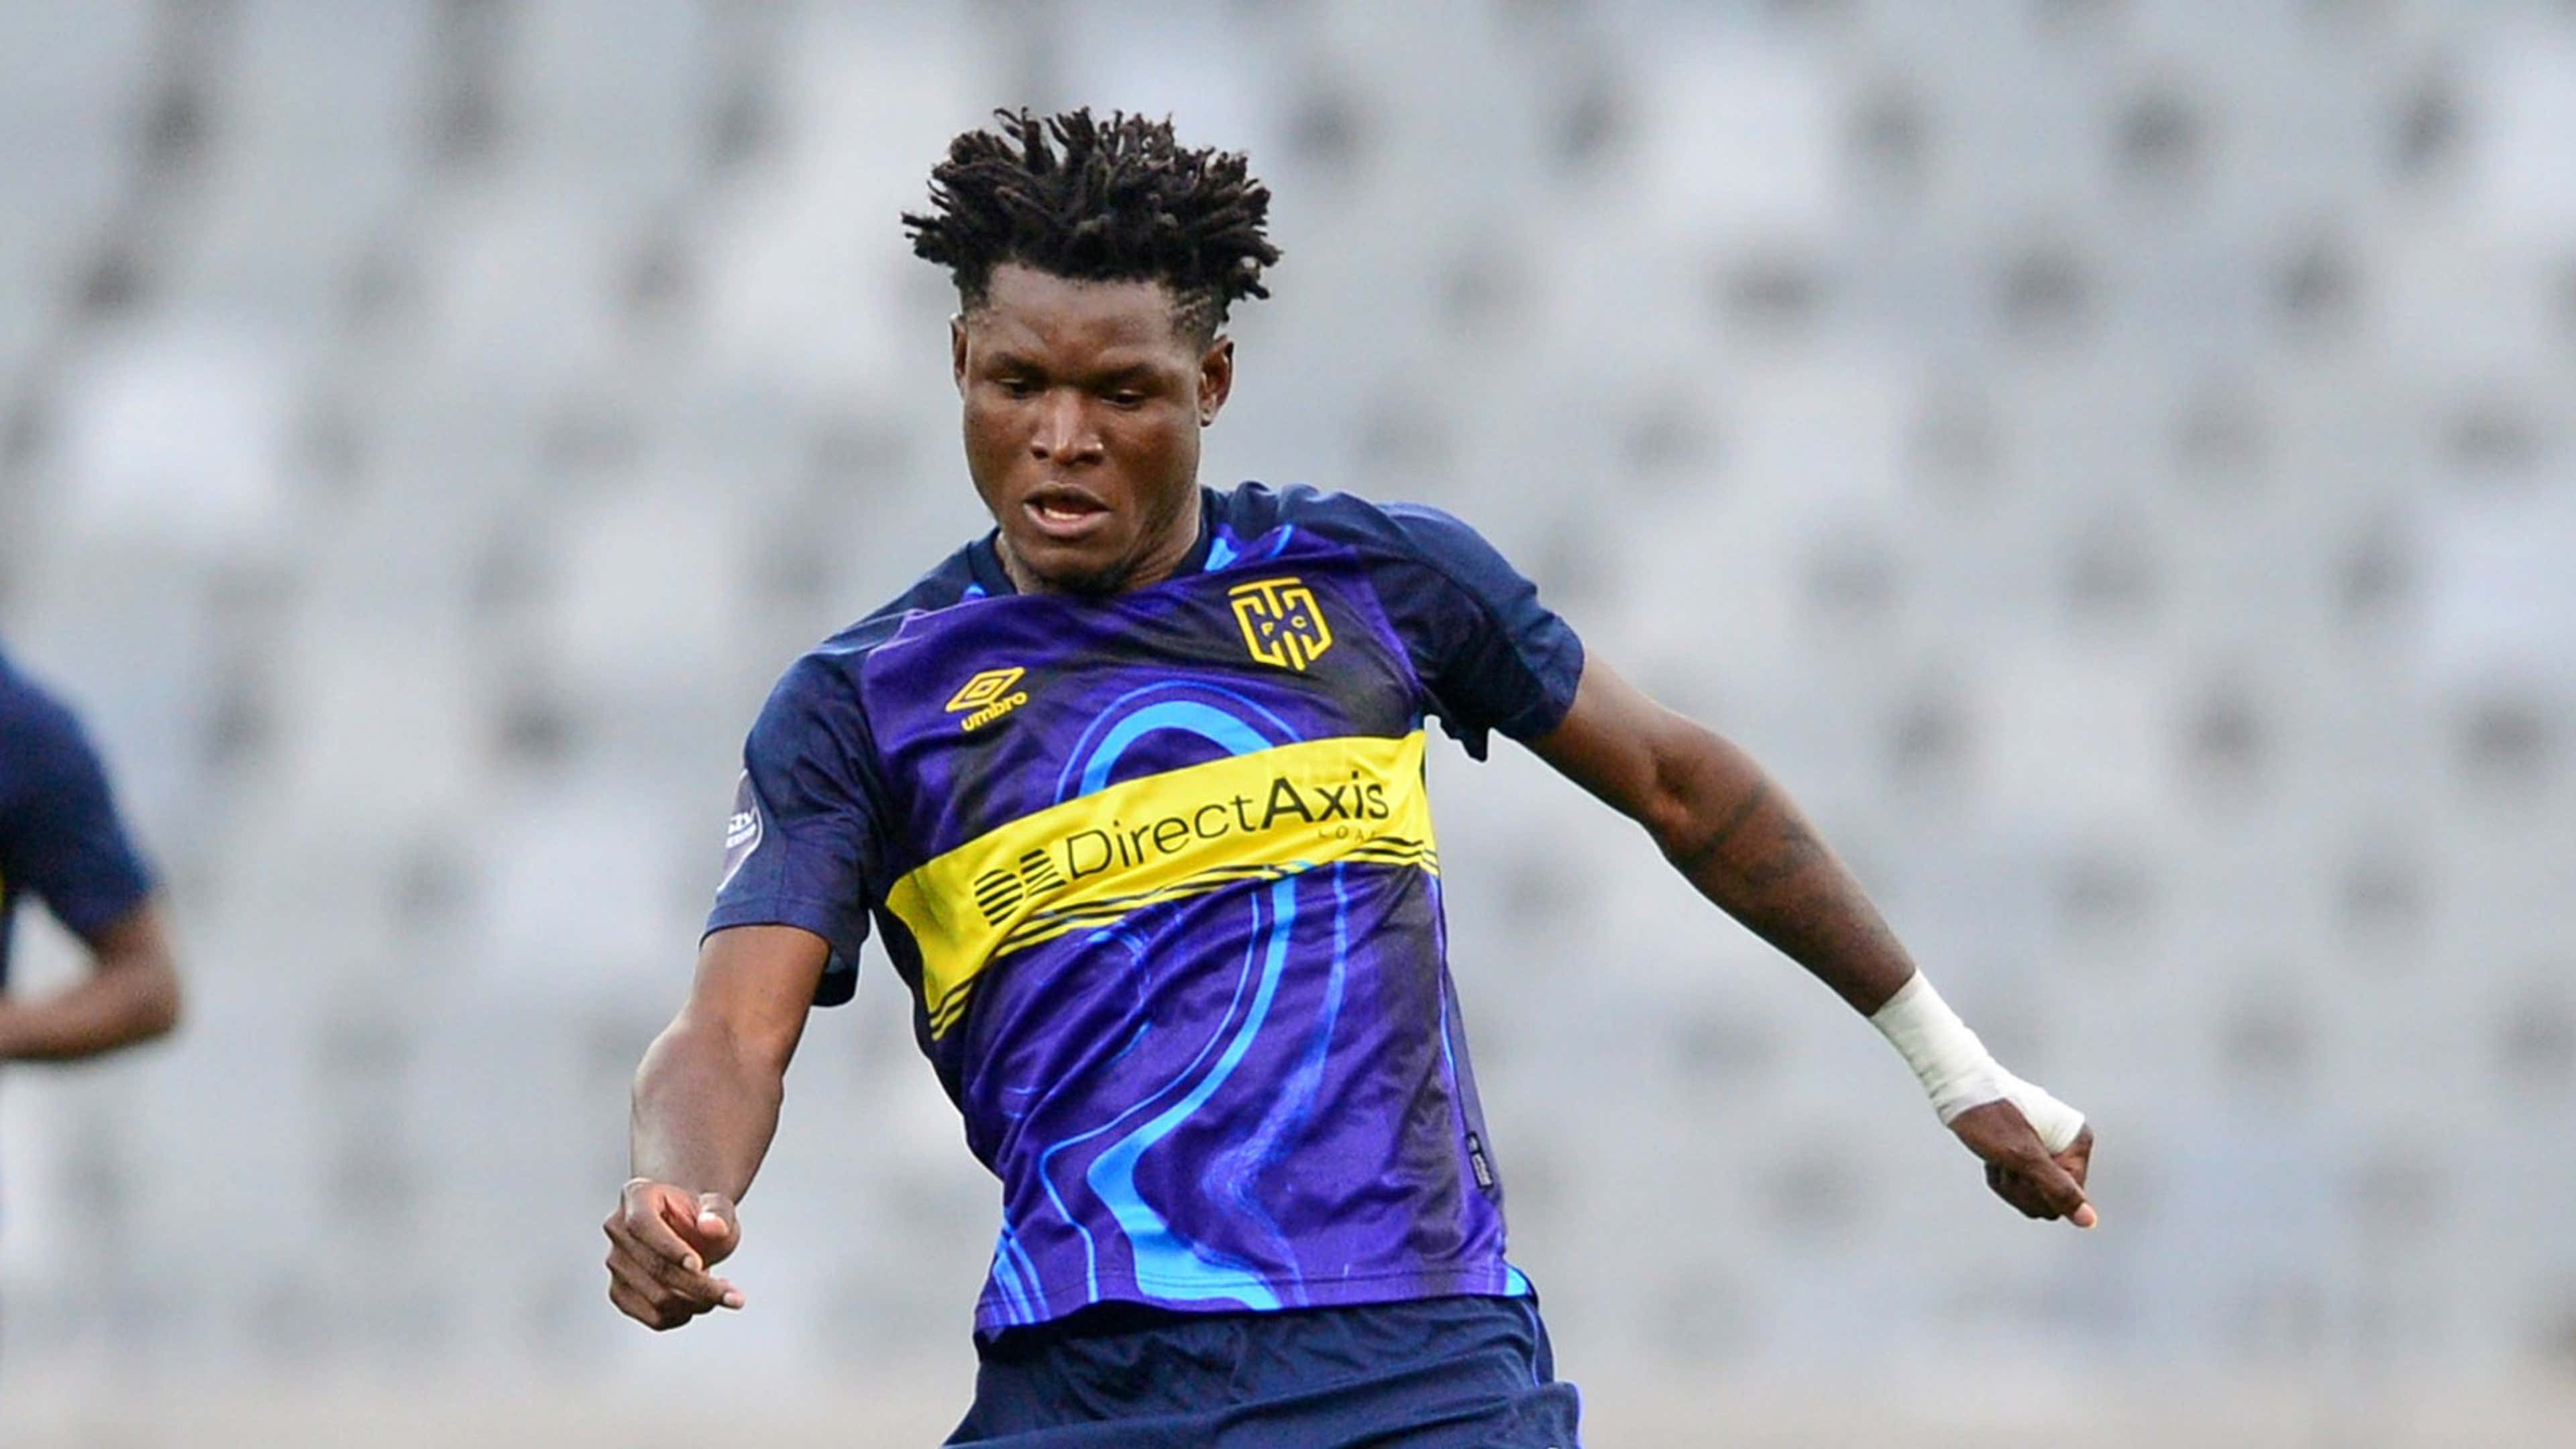 Former Pirates and Sundowns defender joins Cape Town City